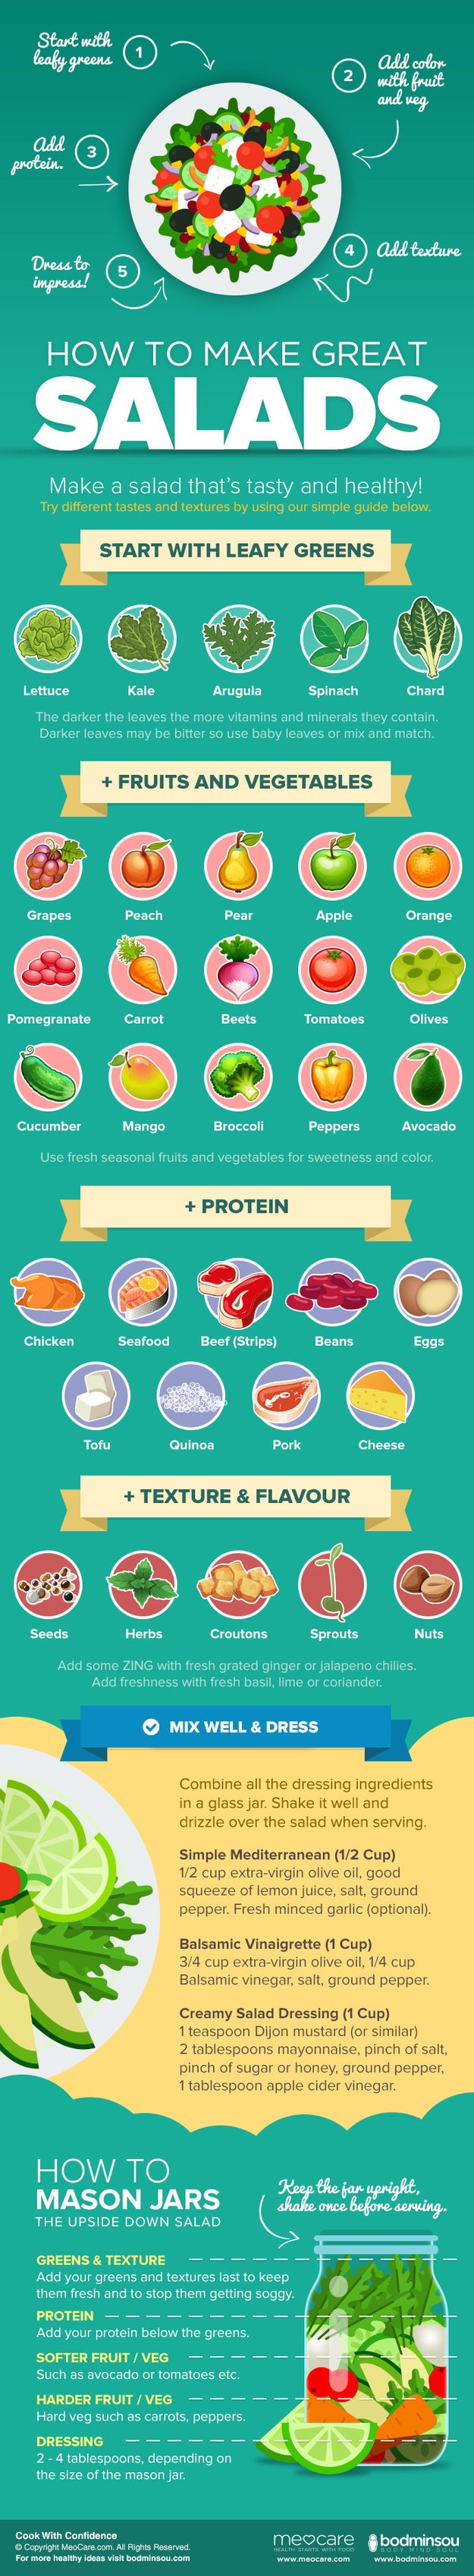 20 Cheat Sheets For When You're Trying To Eat A Little Healthier